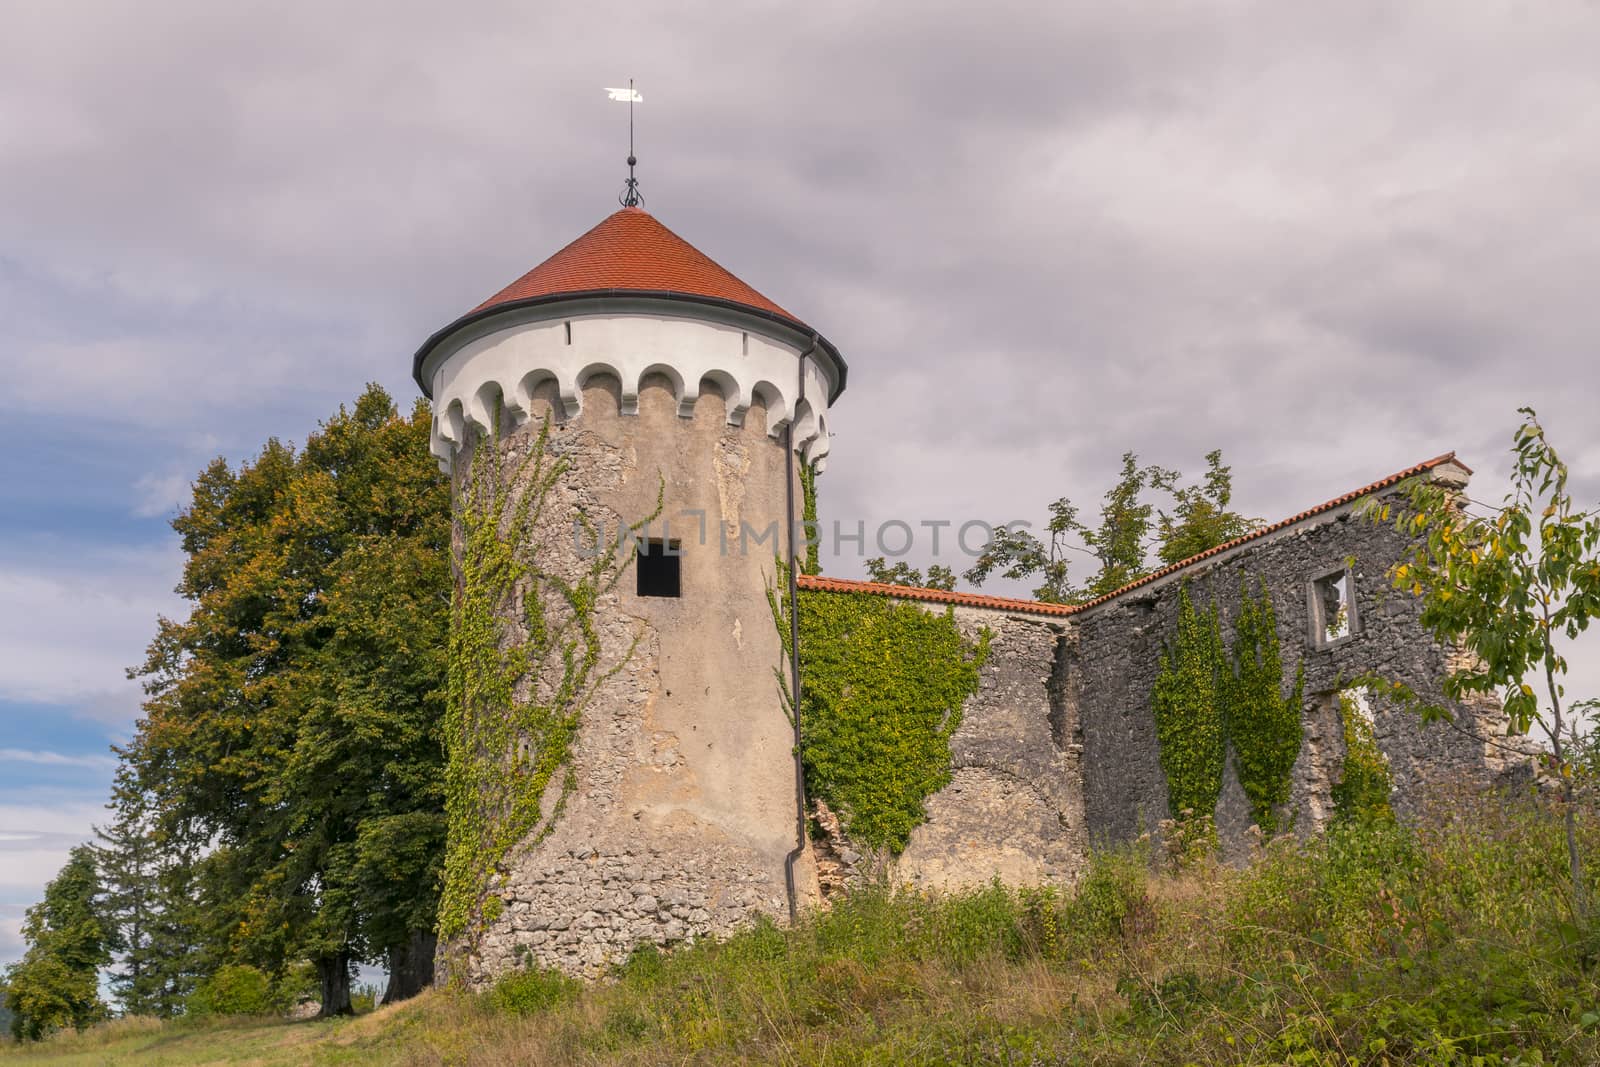 Watchtower and medieval ruins of Kalc (Kalec) castle, Pivka, Slo by asafaric